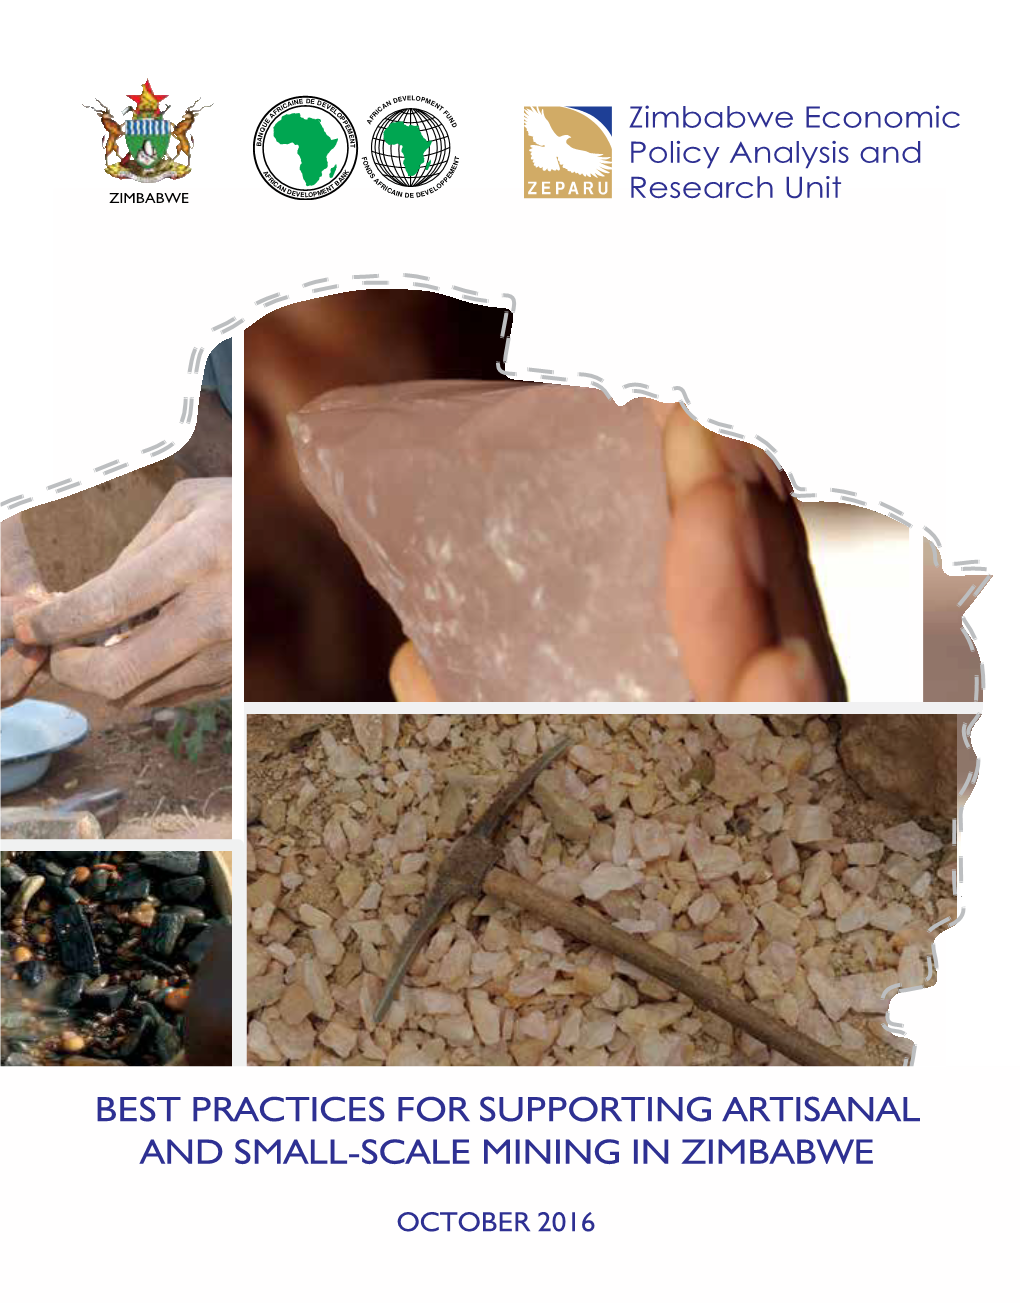 Best Practices for Supporting Artisanal and Small-Scale Mining in Zimbabwe